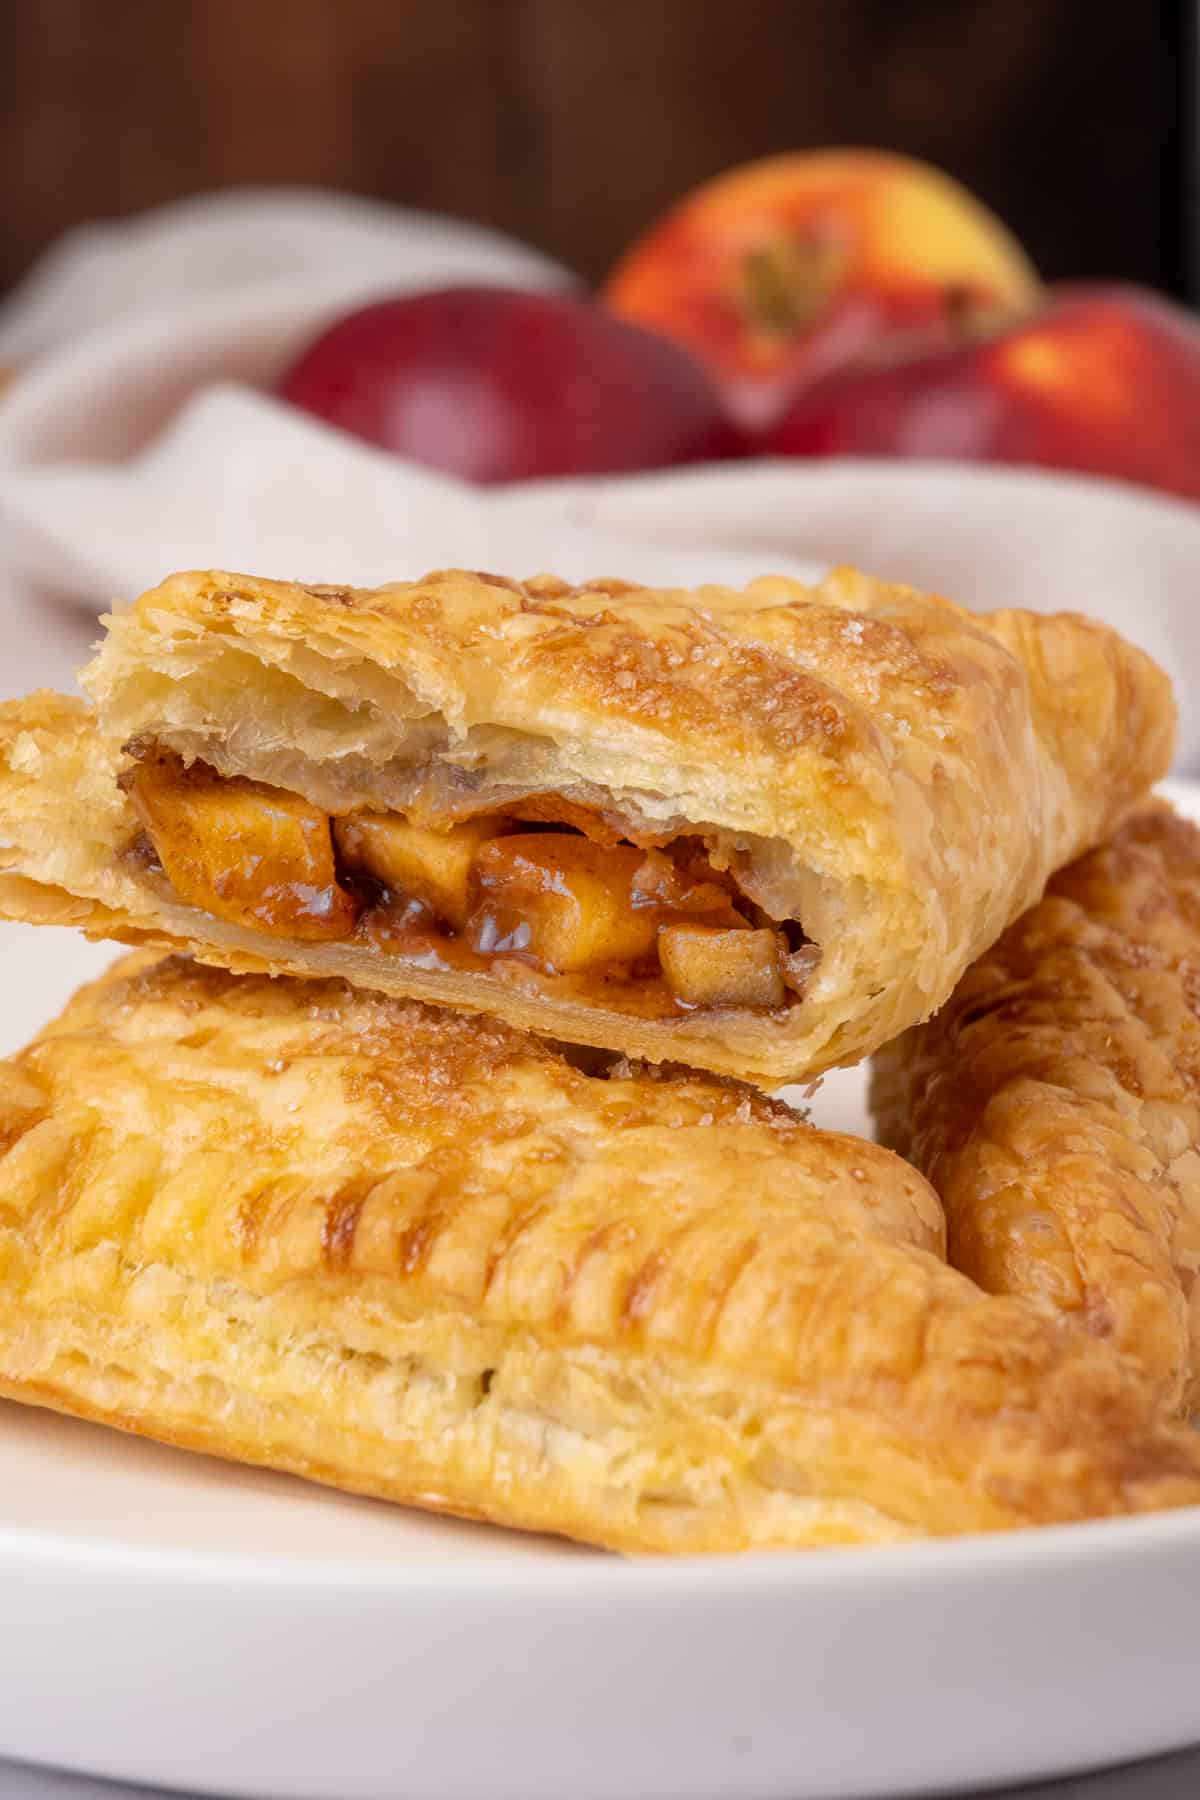 A turnover sliced open to reveal the moist and soft apple filling.